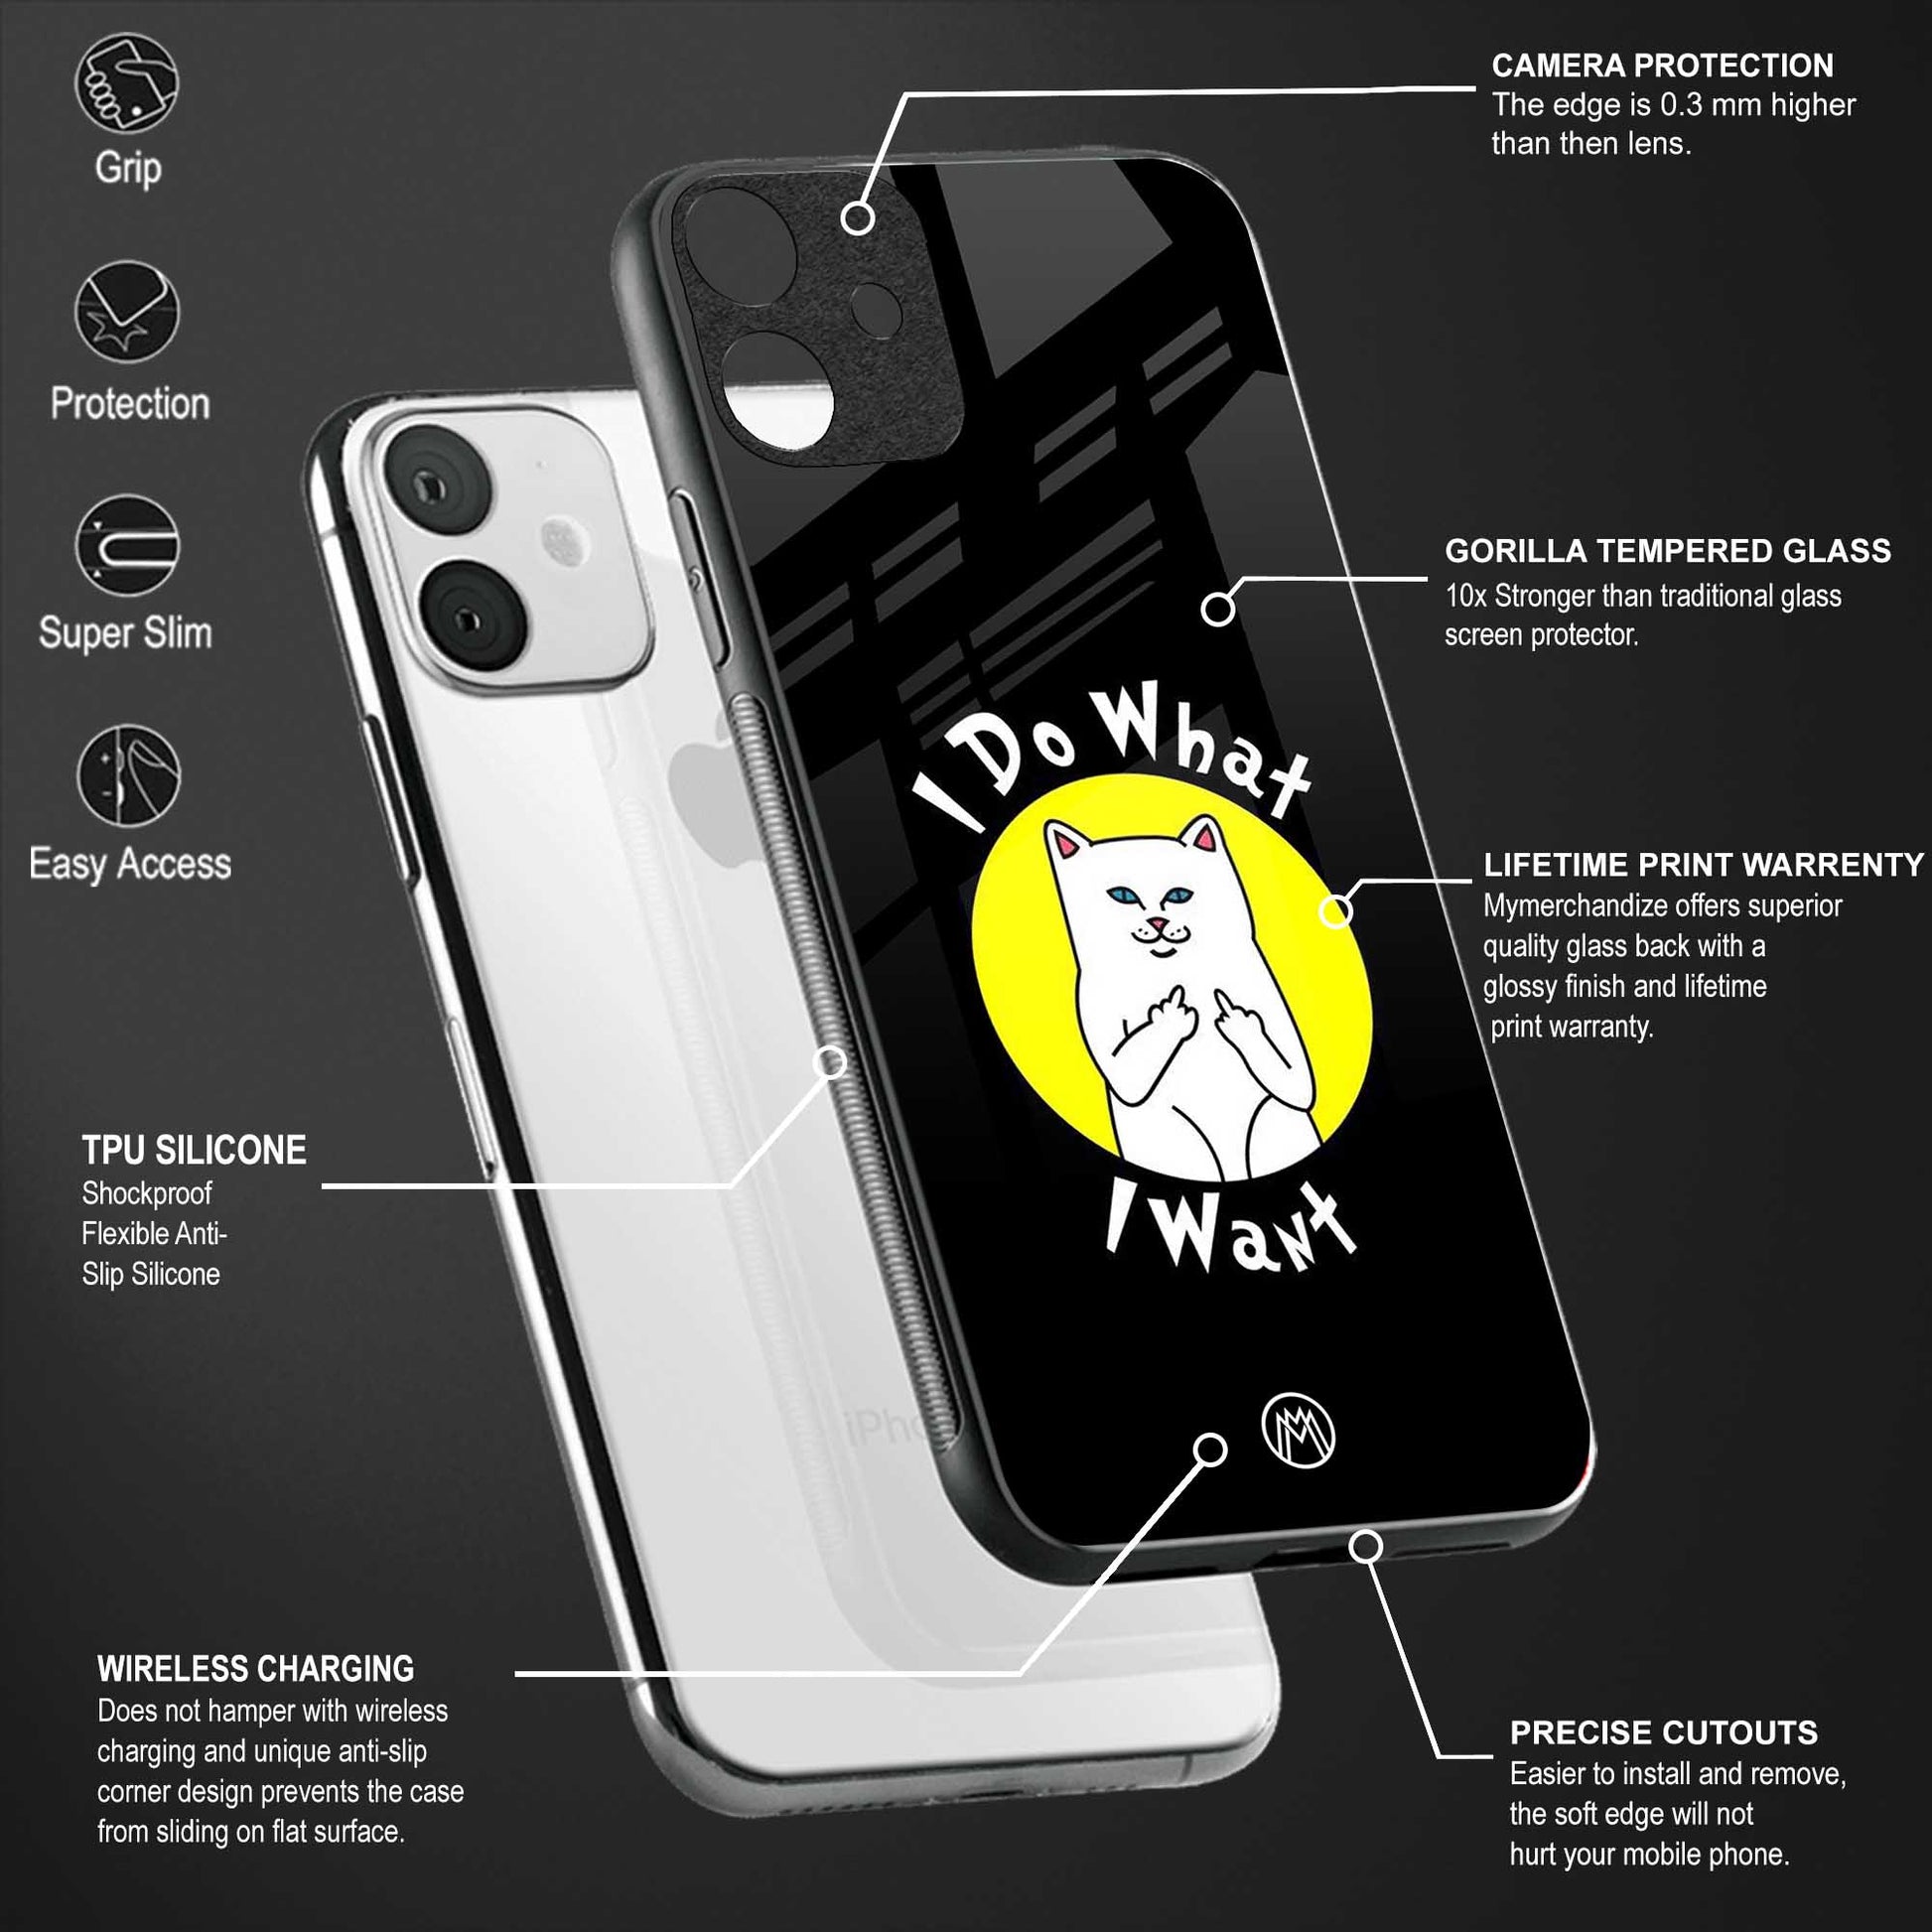 i do what i want glass case for iphone 11